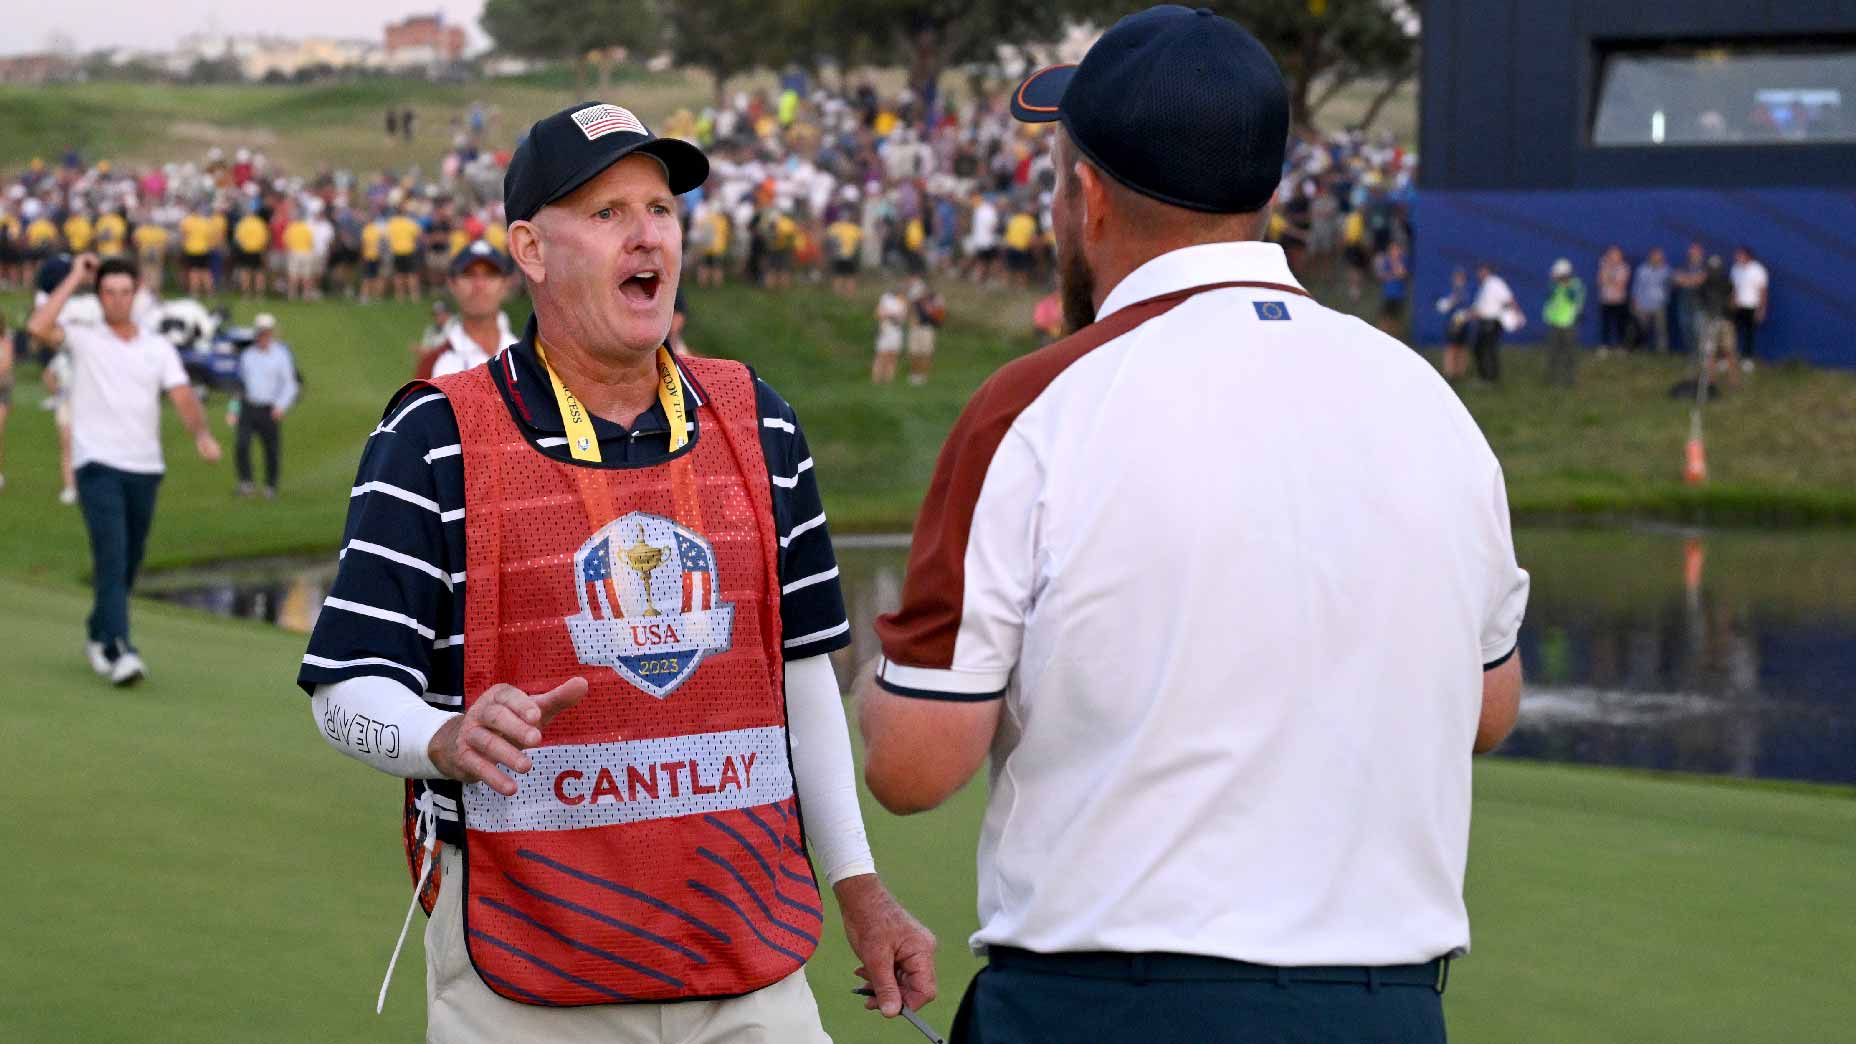 Shouting Match Erupts between Caddie Joe LaCava and Shane Lowry during